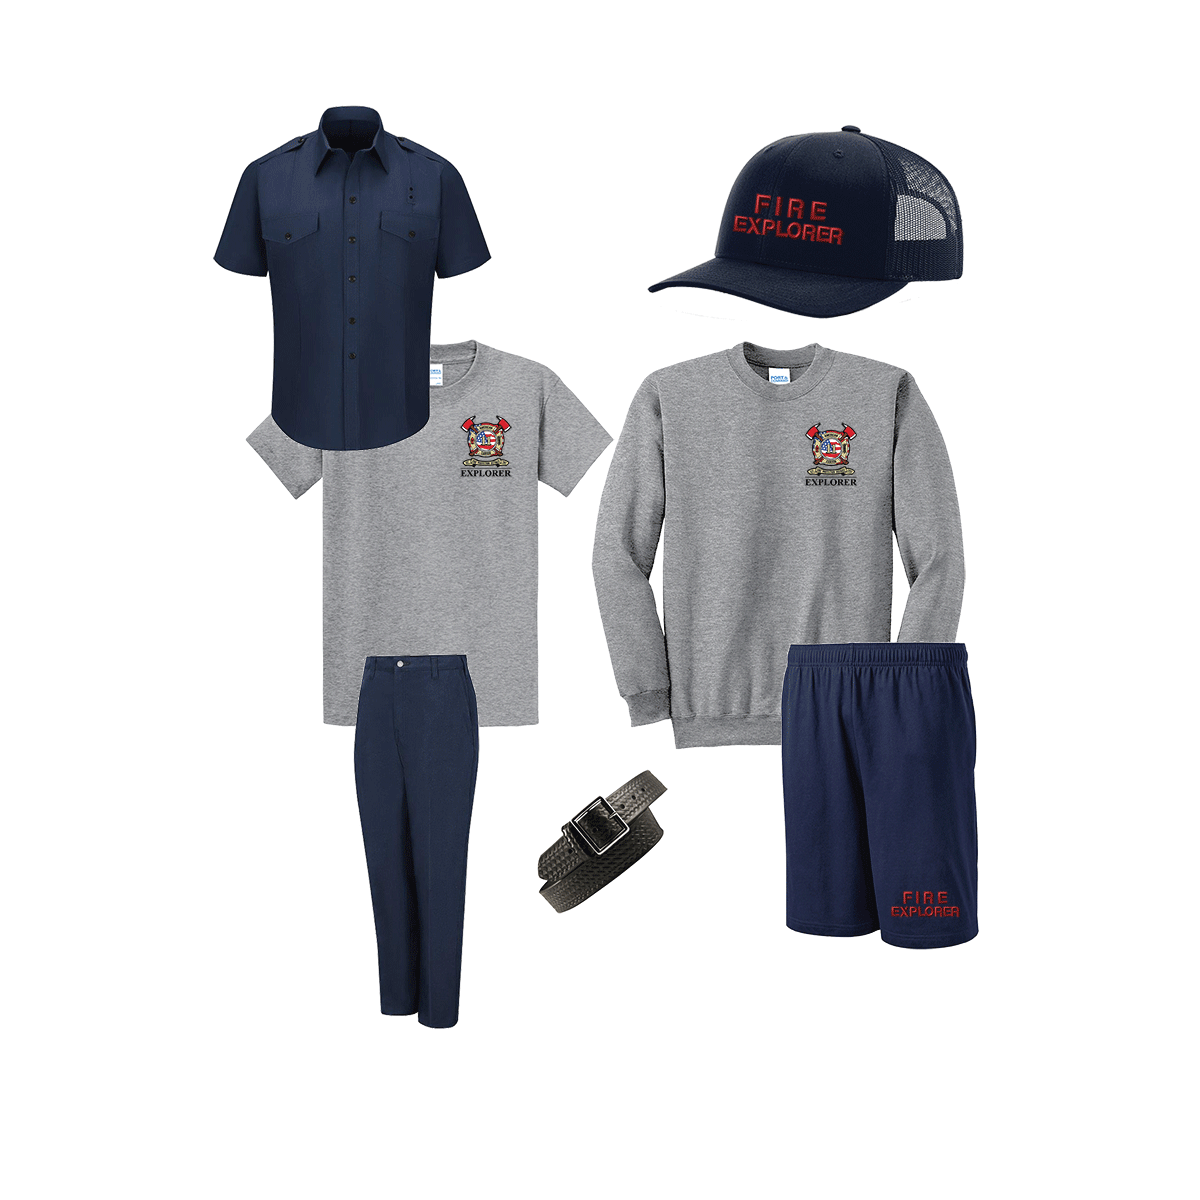 American Canyon Fire Explorer Package